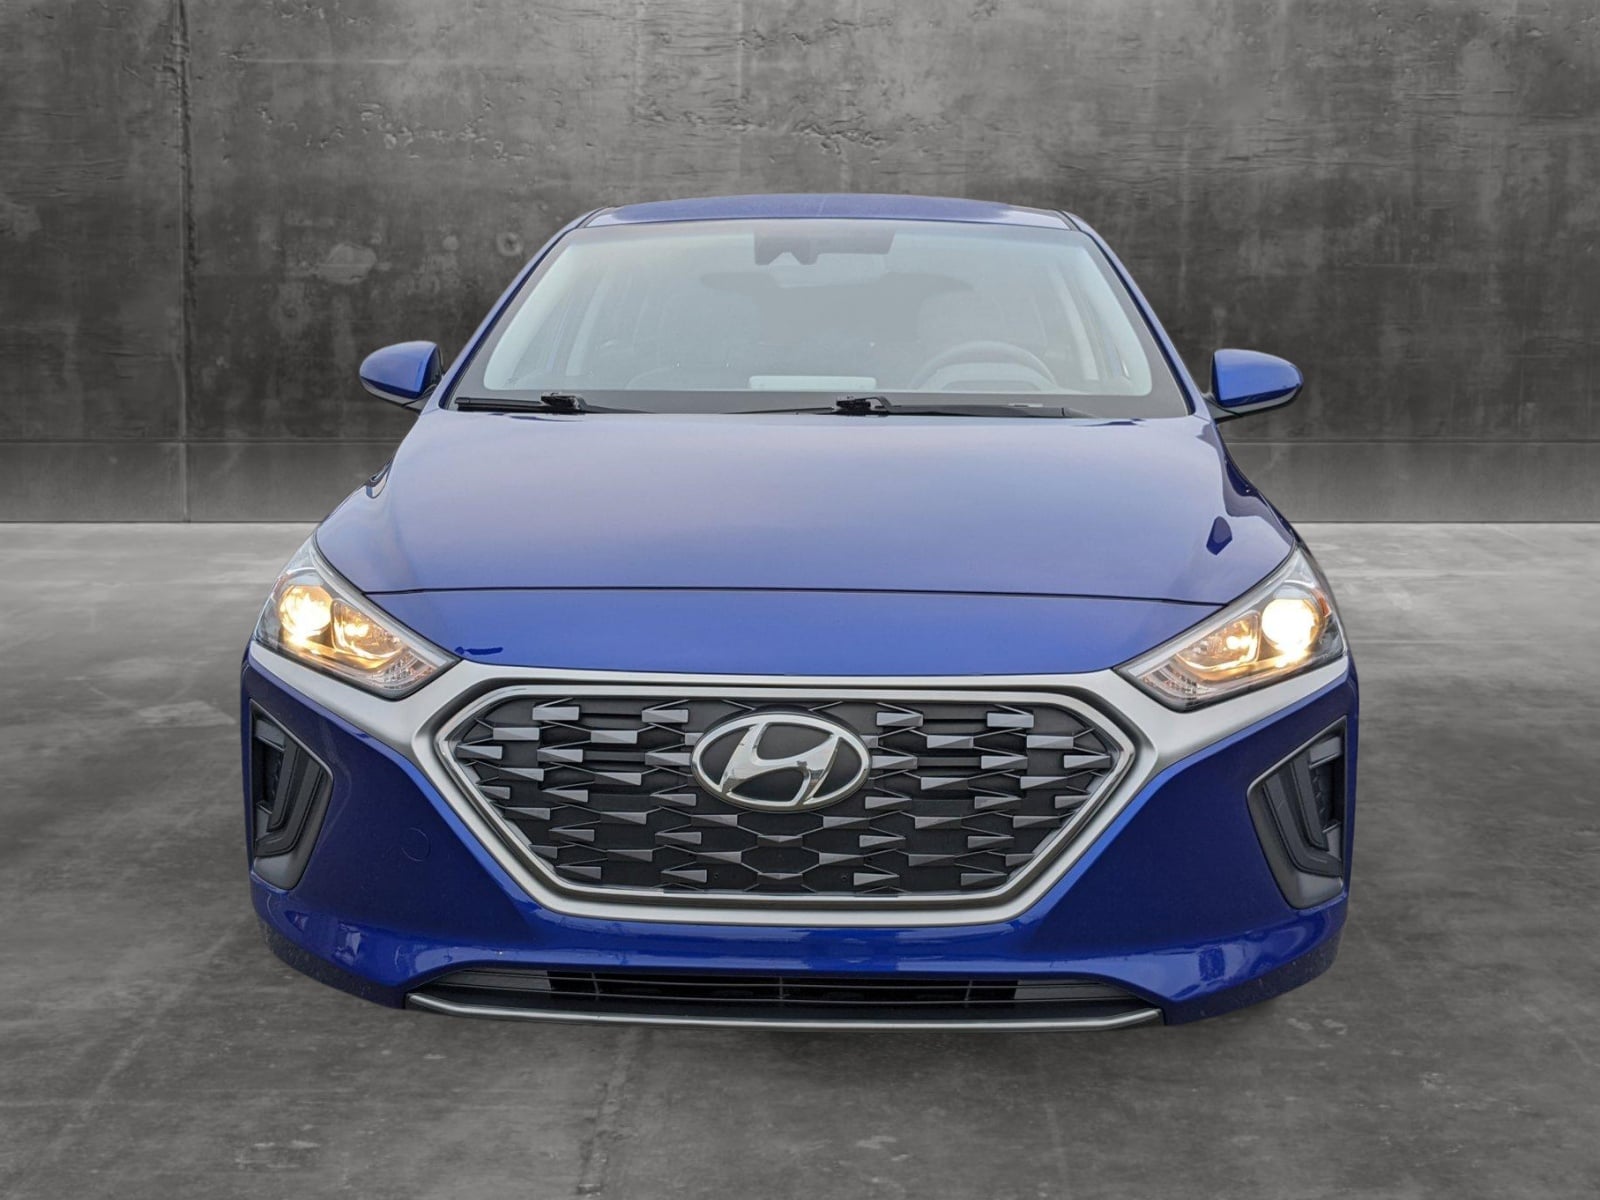 Used 2020 Hyundai IONIQ Blue with VIN KMHC65LC1LU235398 for sale in Fremont, CA